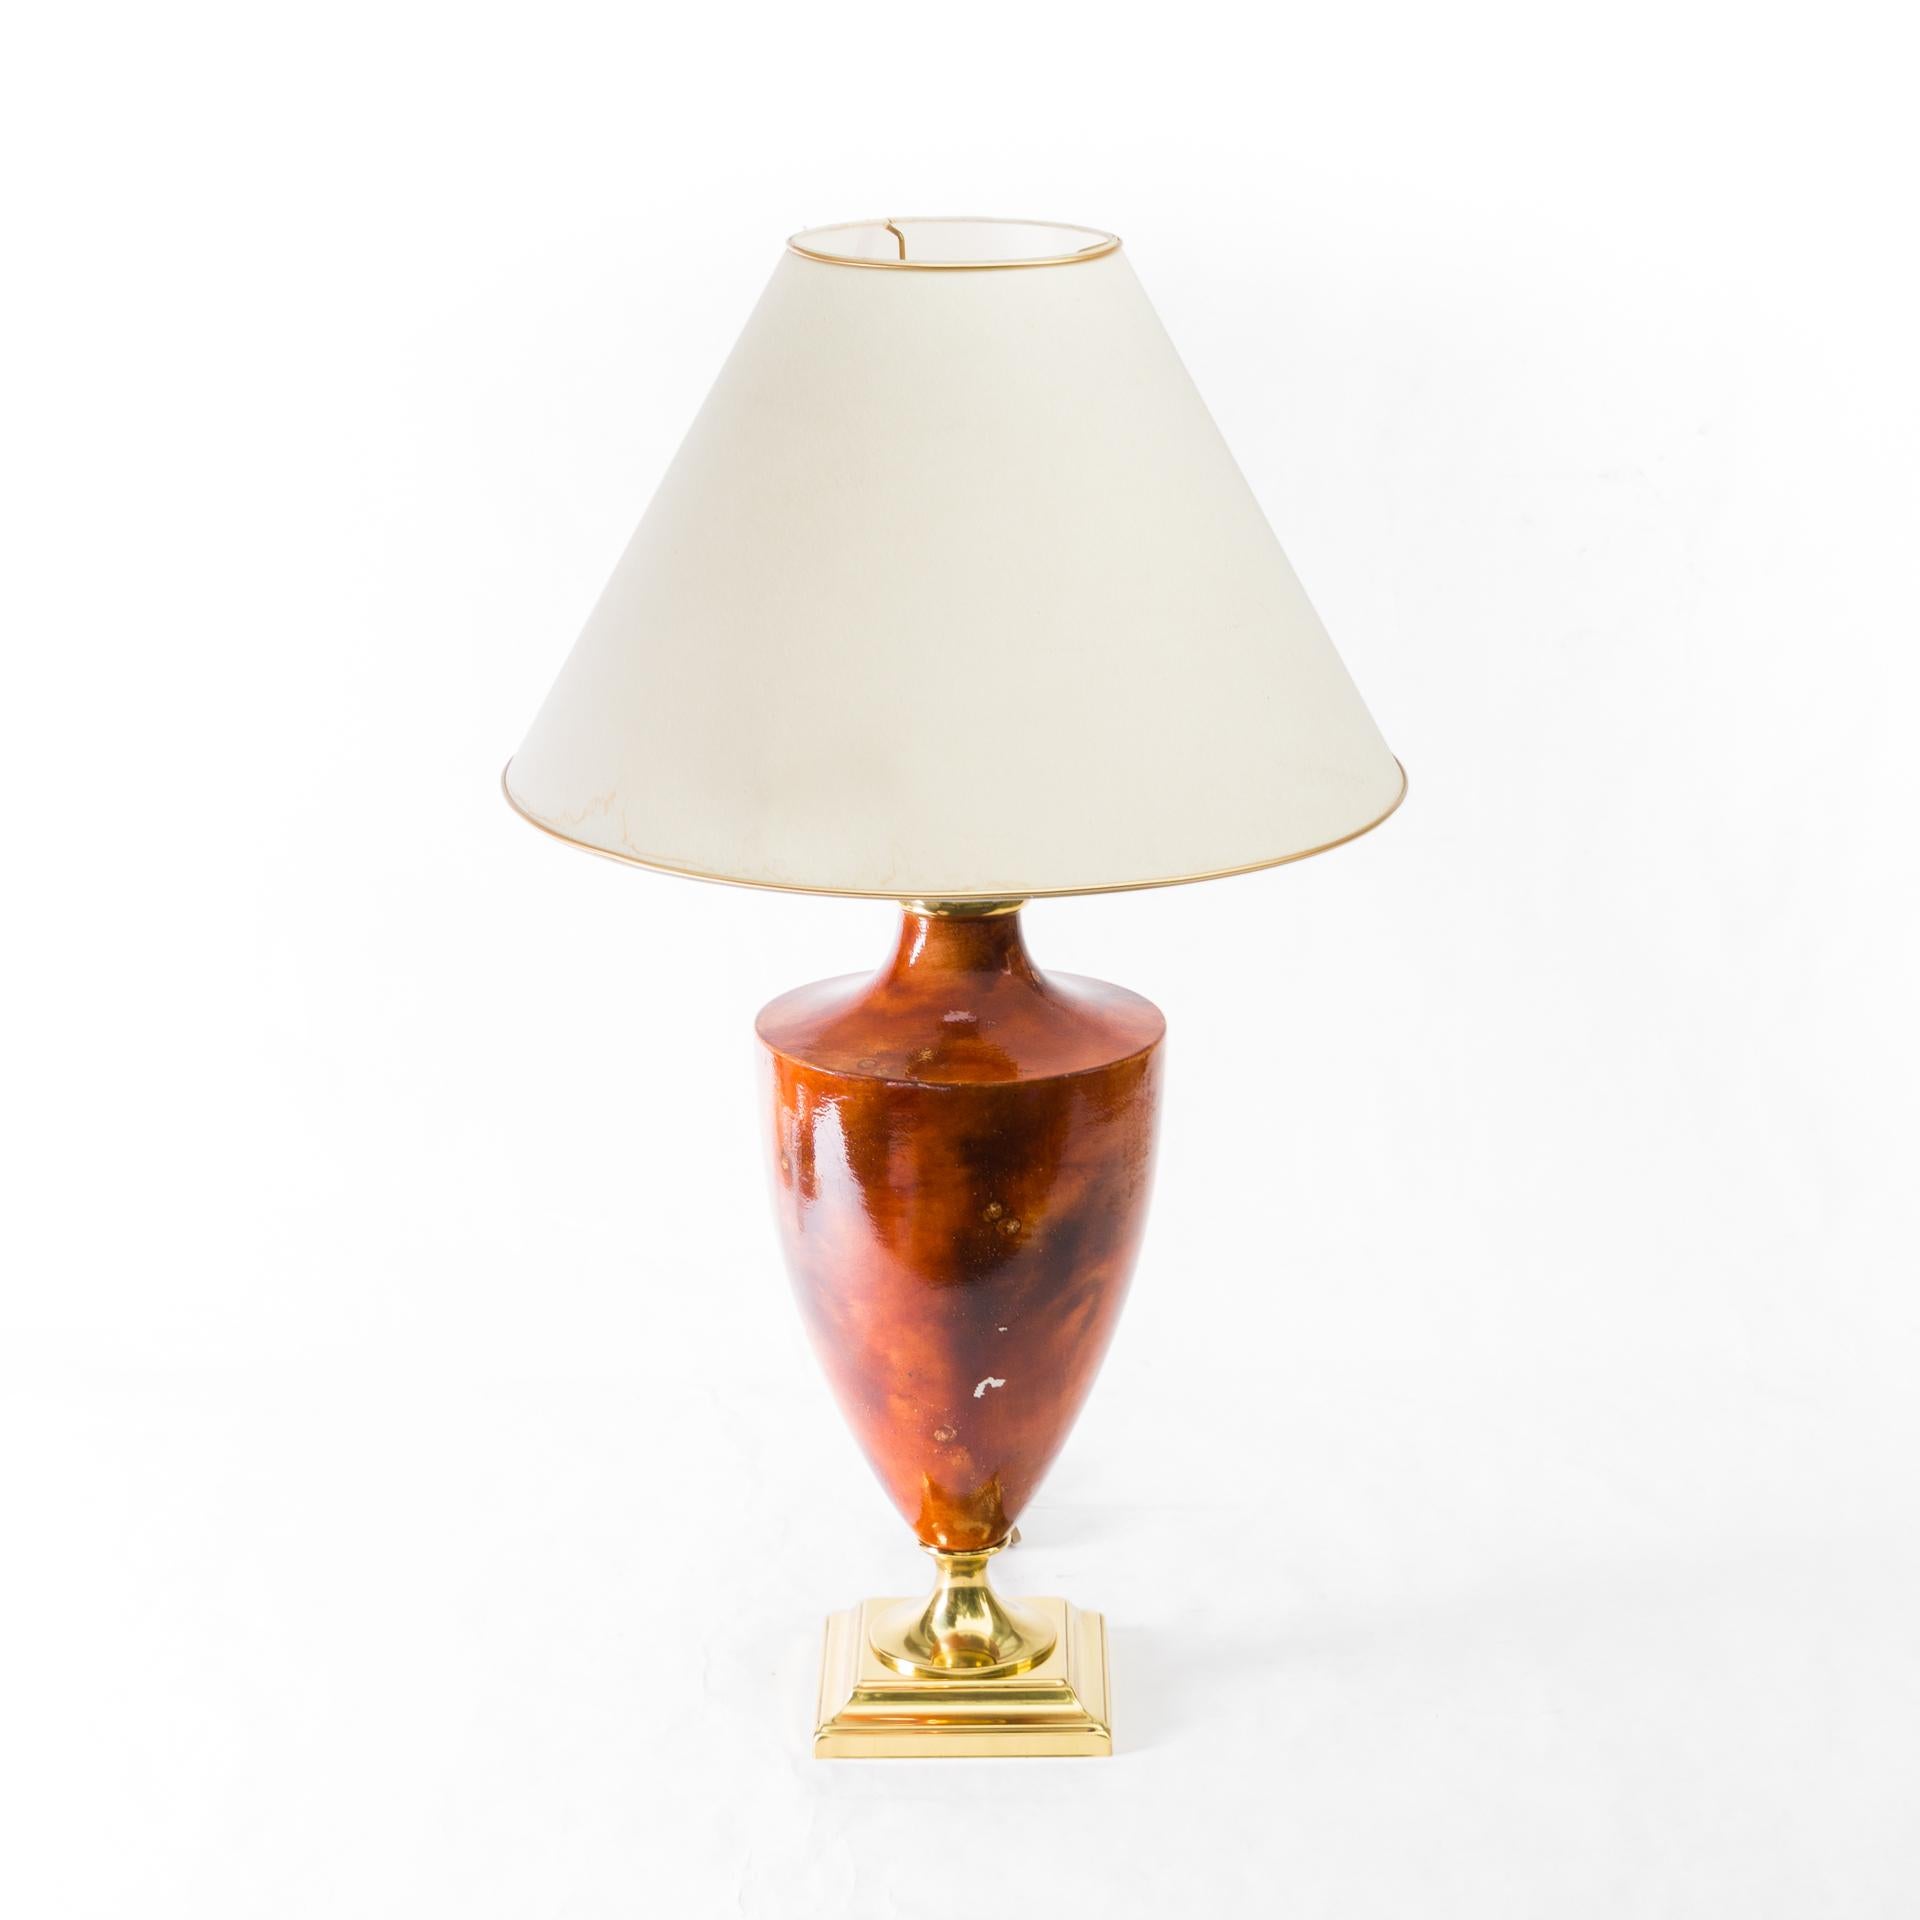 Monumental, beautiful table lamp signed by the French lighting manufacturer Le Dauphin.

The round, expanding upward cut body was made of ceramics with painted decoration imitating stone. The foot evokes inspiration from classicism, it is